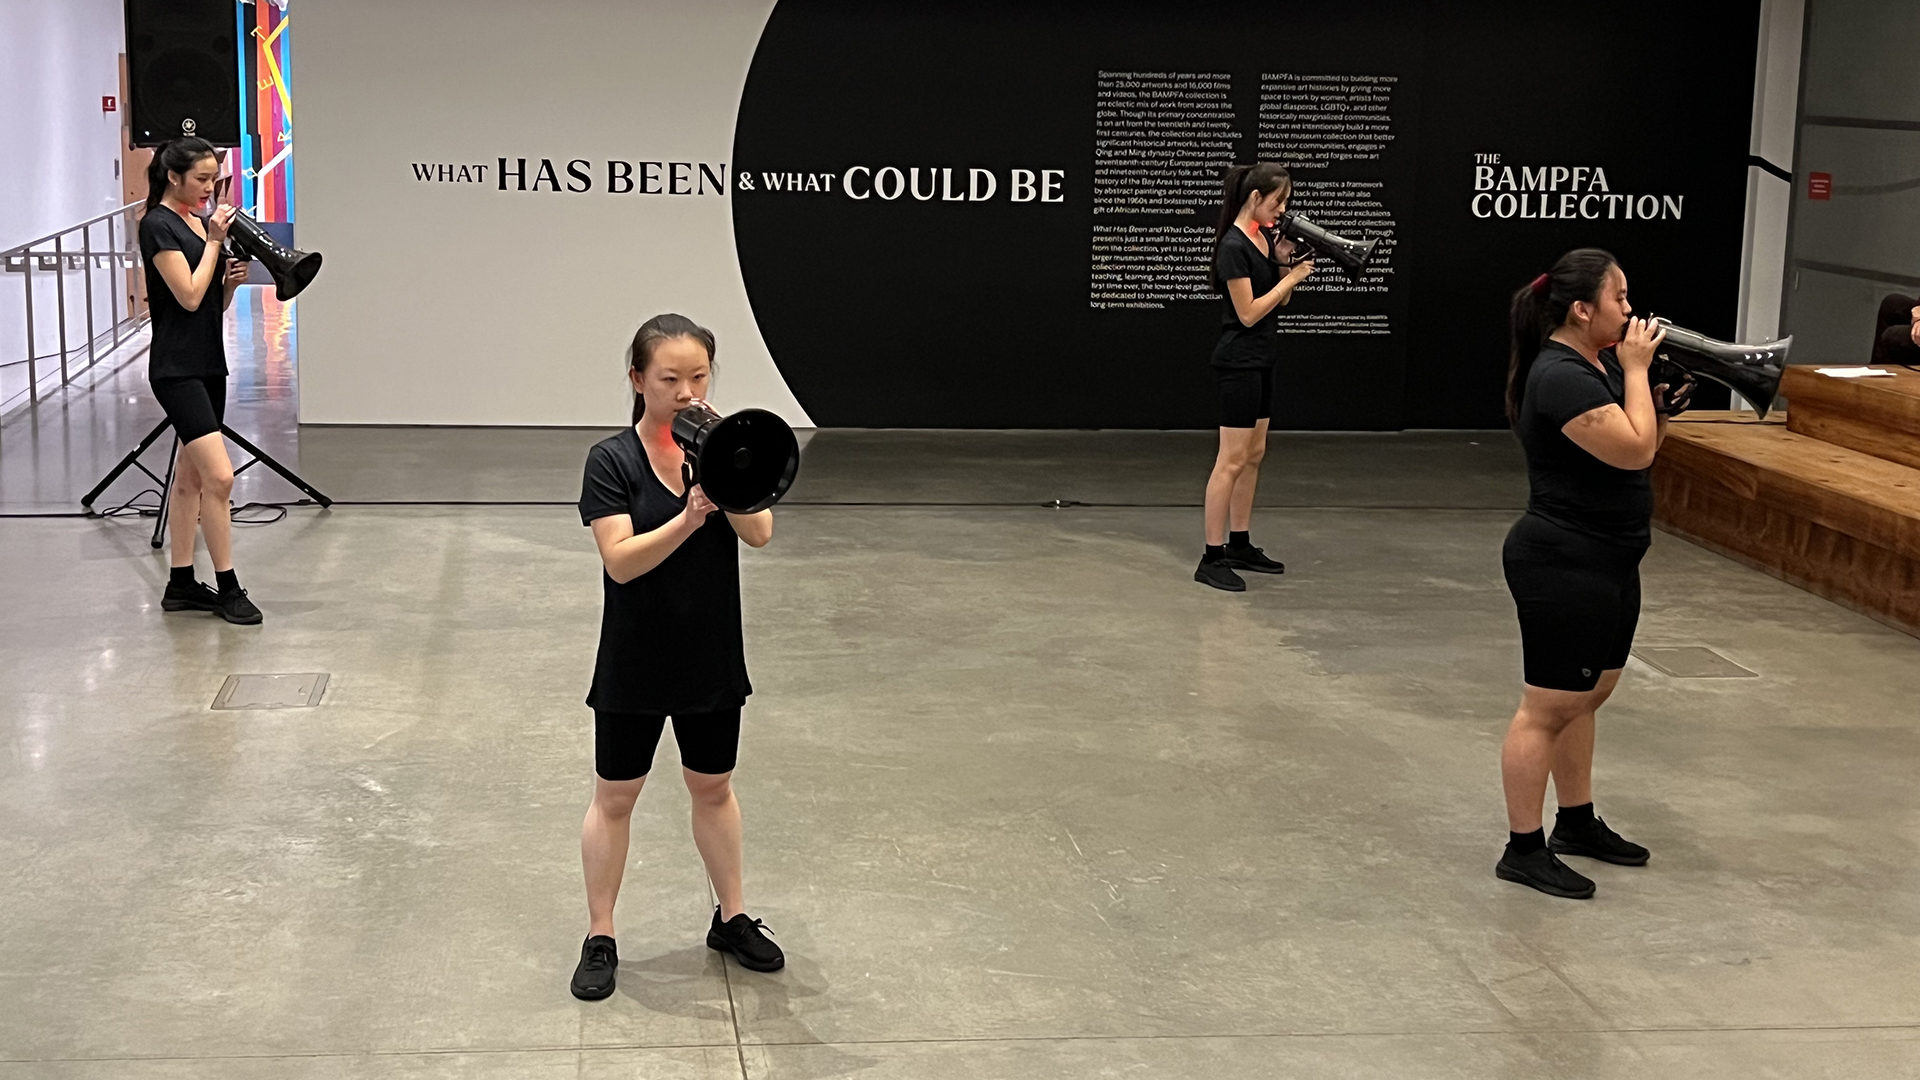 four dancers wearing all black hold bullhorns up to their mouths during a dance performance in a gallery space